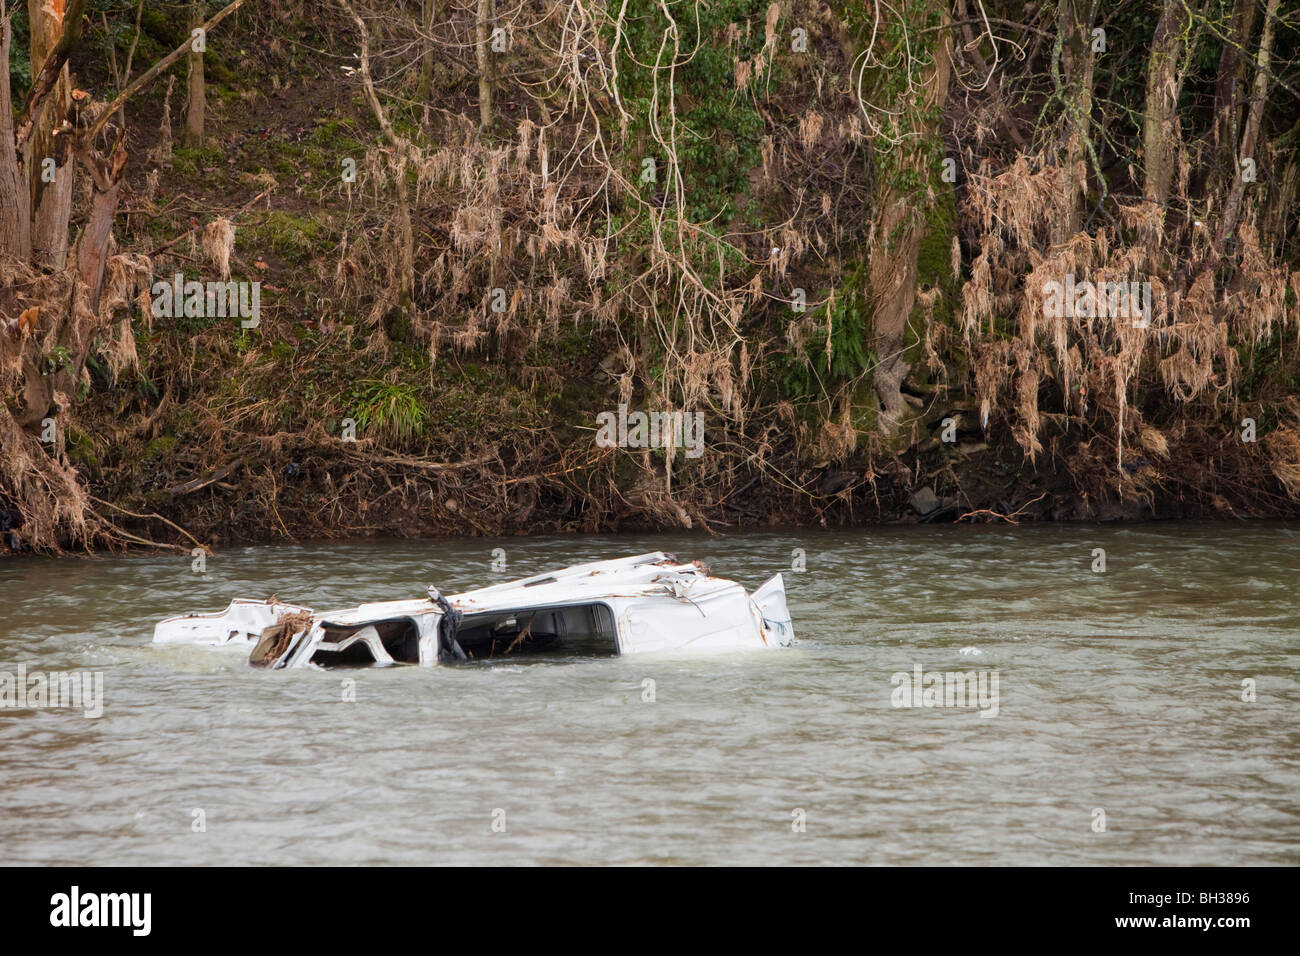 A van washed away during the November 2009 floods in the River Derwent, downstream of Cockermouth, Cumbria, UK. Stock Photo